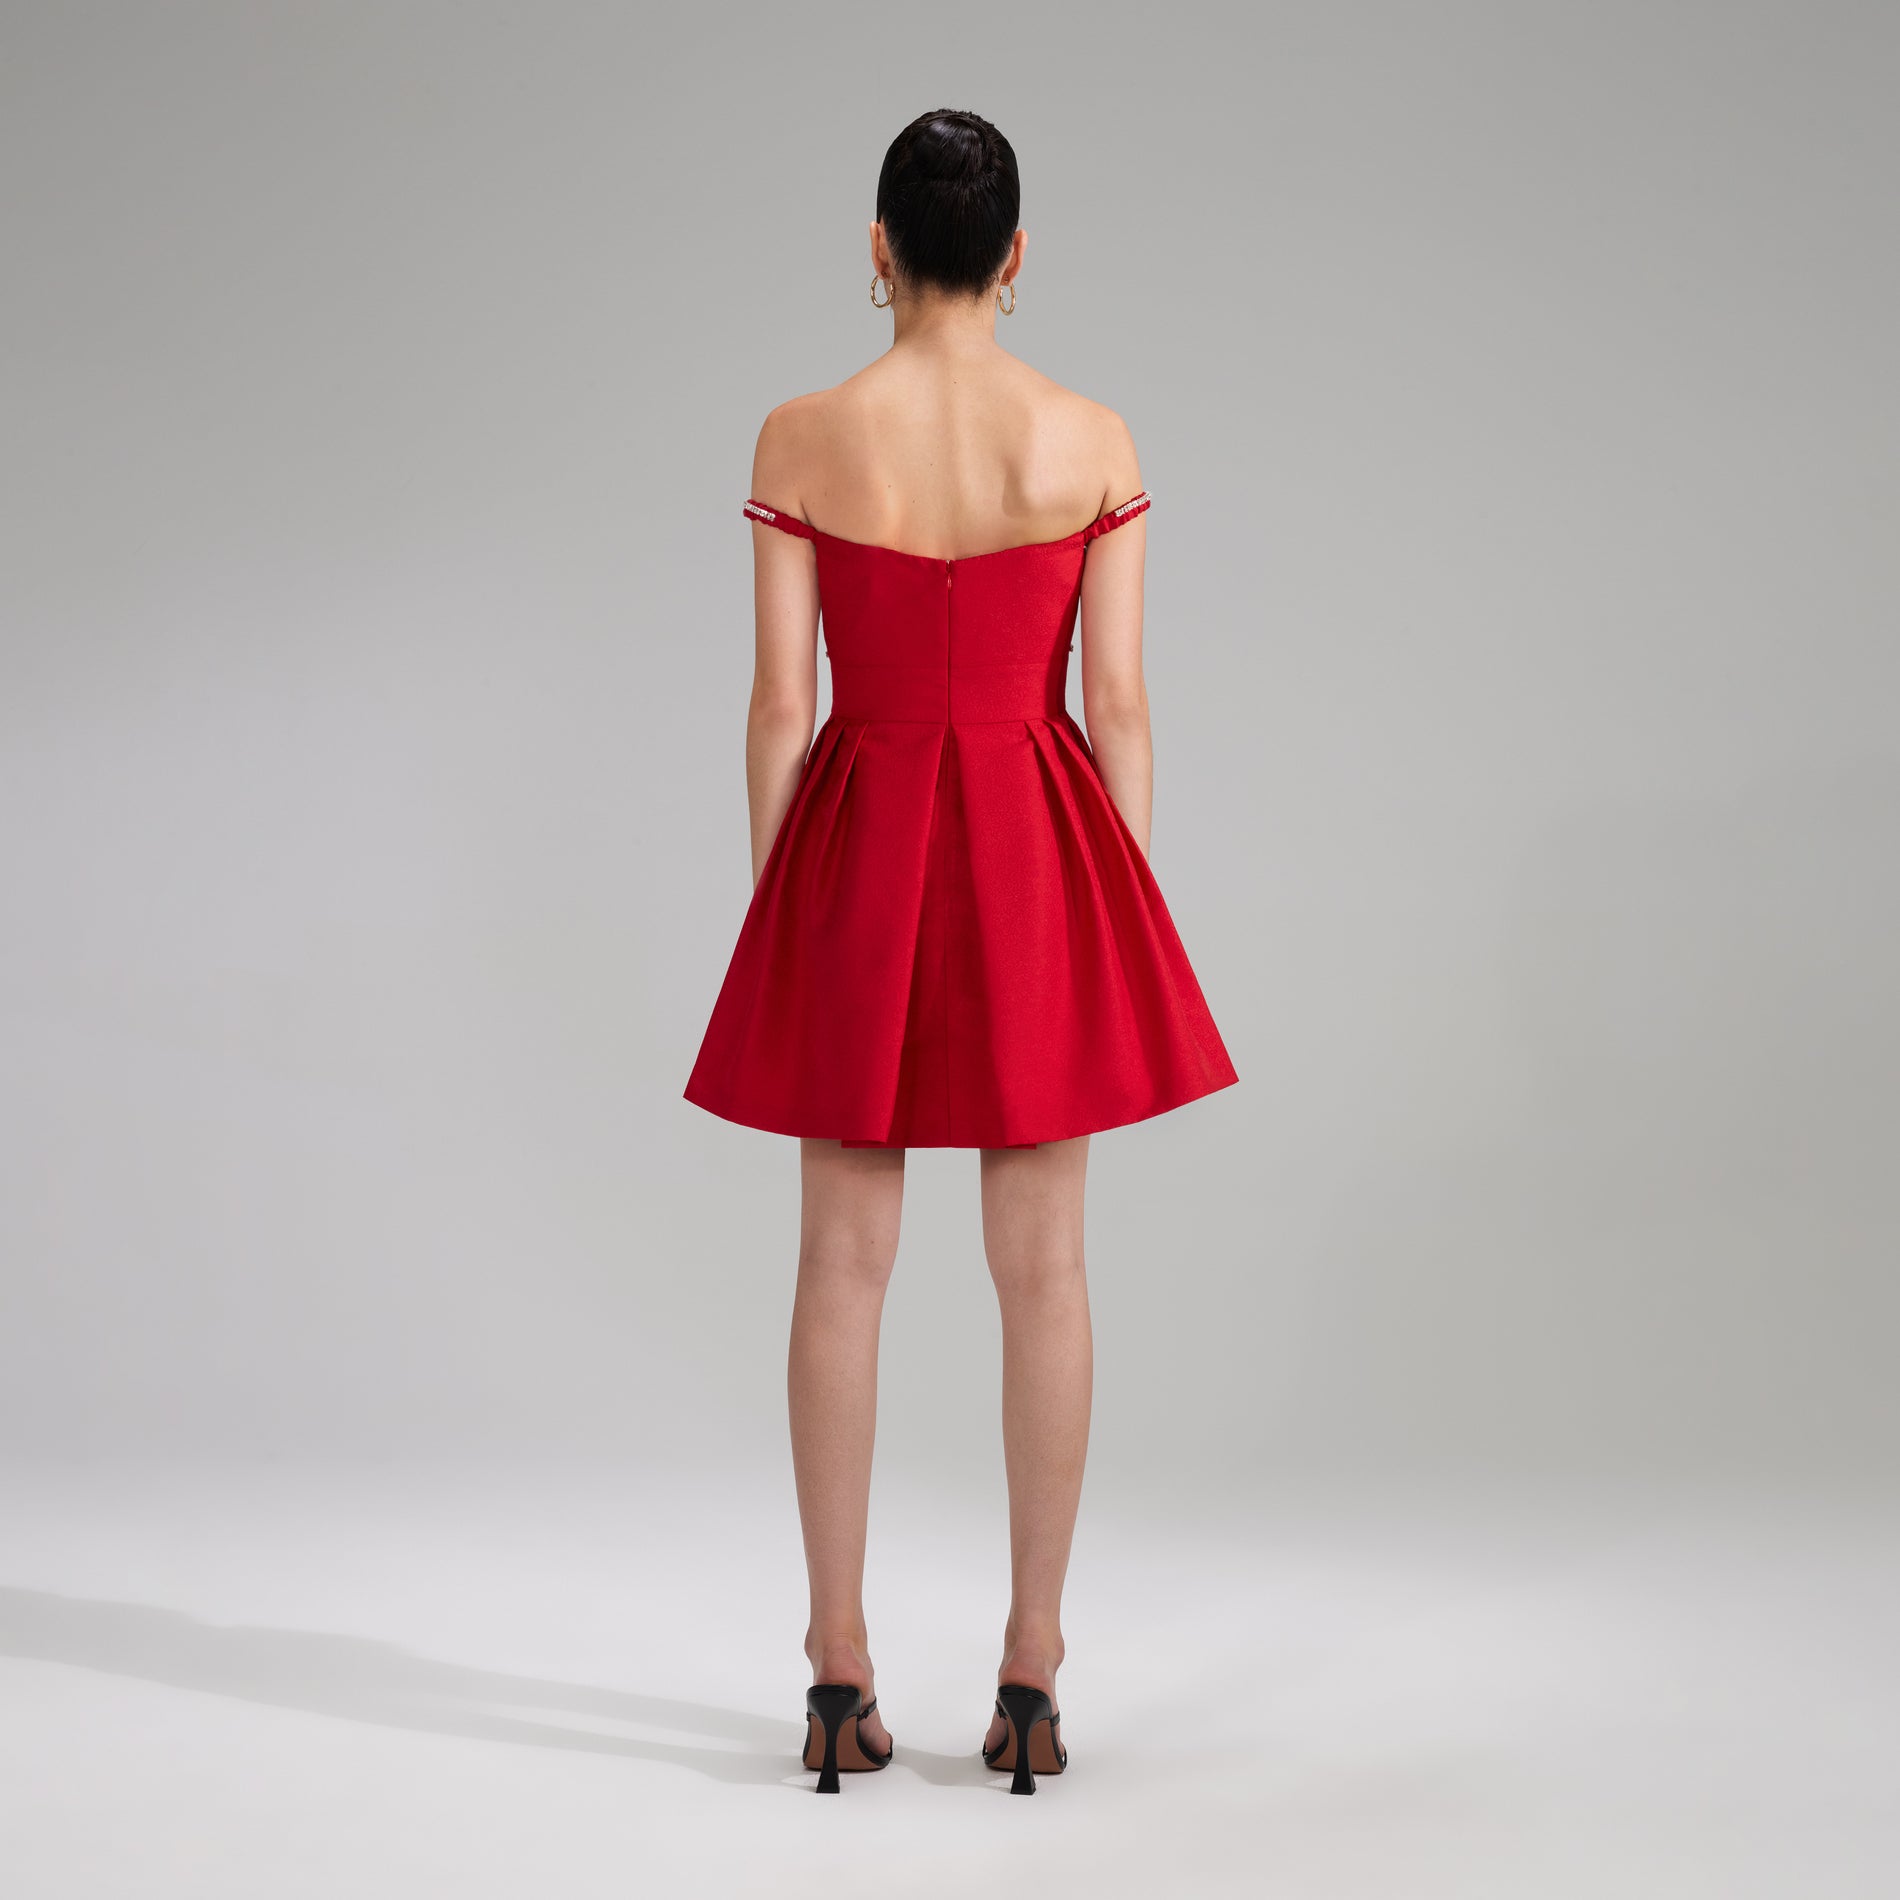 A woman wearing the Red Textured Diamante Detail Mini Dress